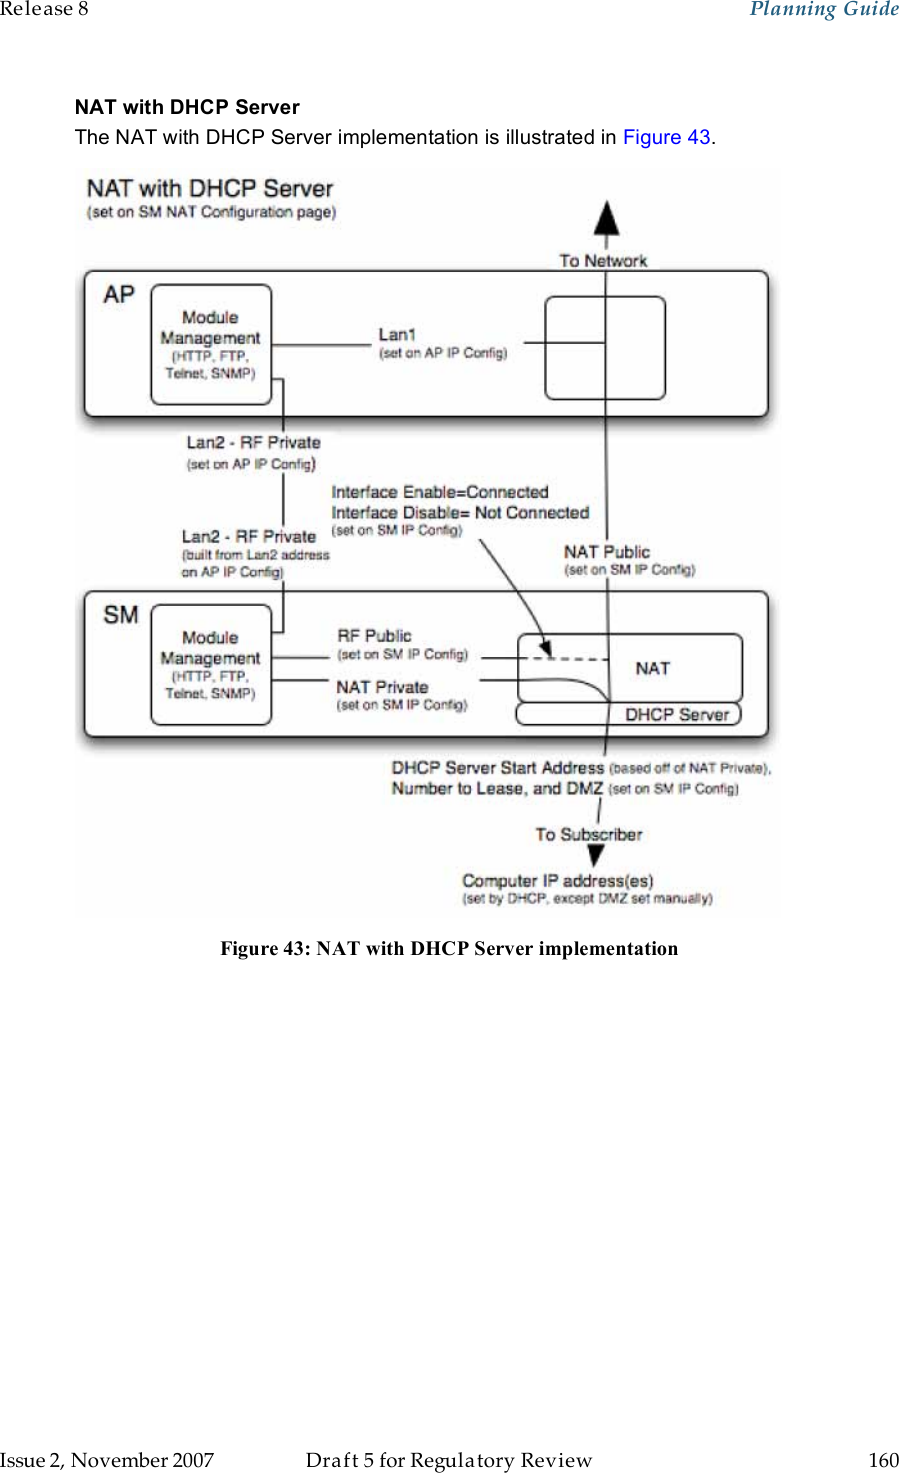 Release 8    Planning Guide                  March 200                  Through Software Release 6.   Issue 2, November 2007  Draft 5 for Regulatory Review  160     NAT with DHCP Server The NAT with DHCP Server implementation is illustrated in Figure 43.  Figure 43: NAT with DHCP Server implementation 